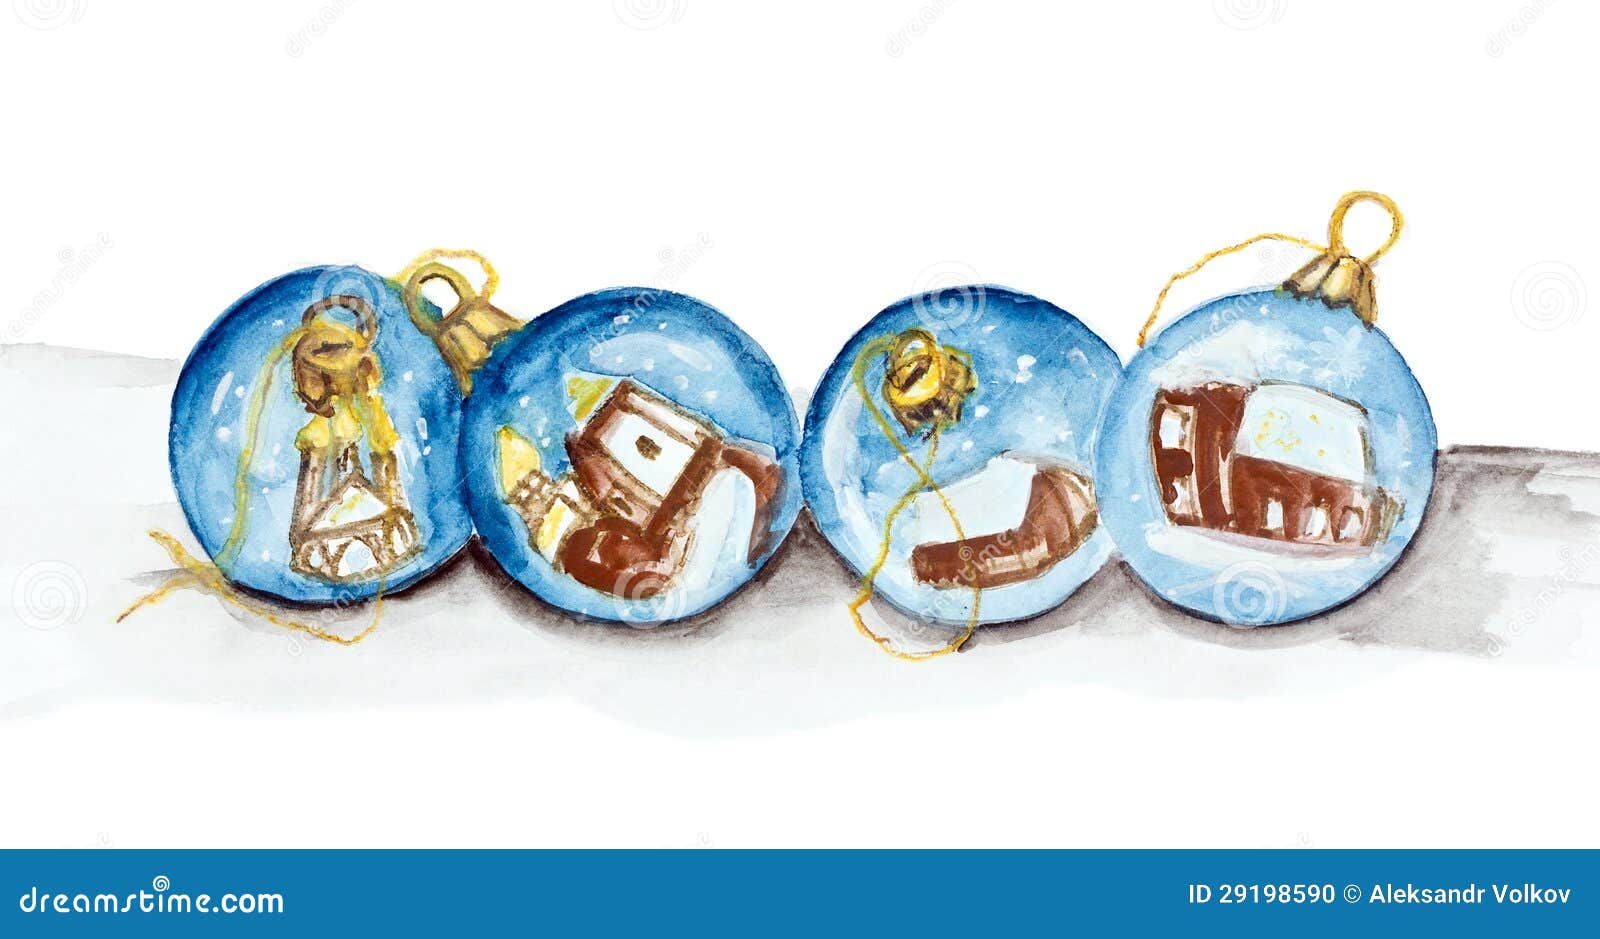 balls image the with old glass painting   the glass Christmas of  Year's balls christmas New spheres